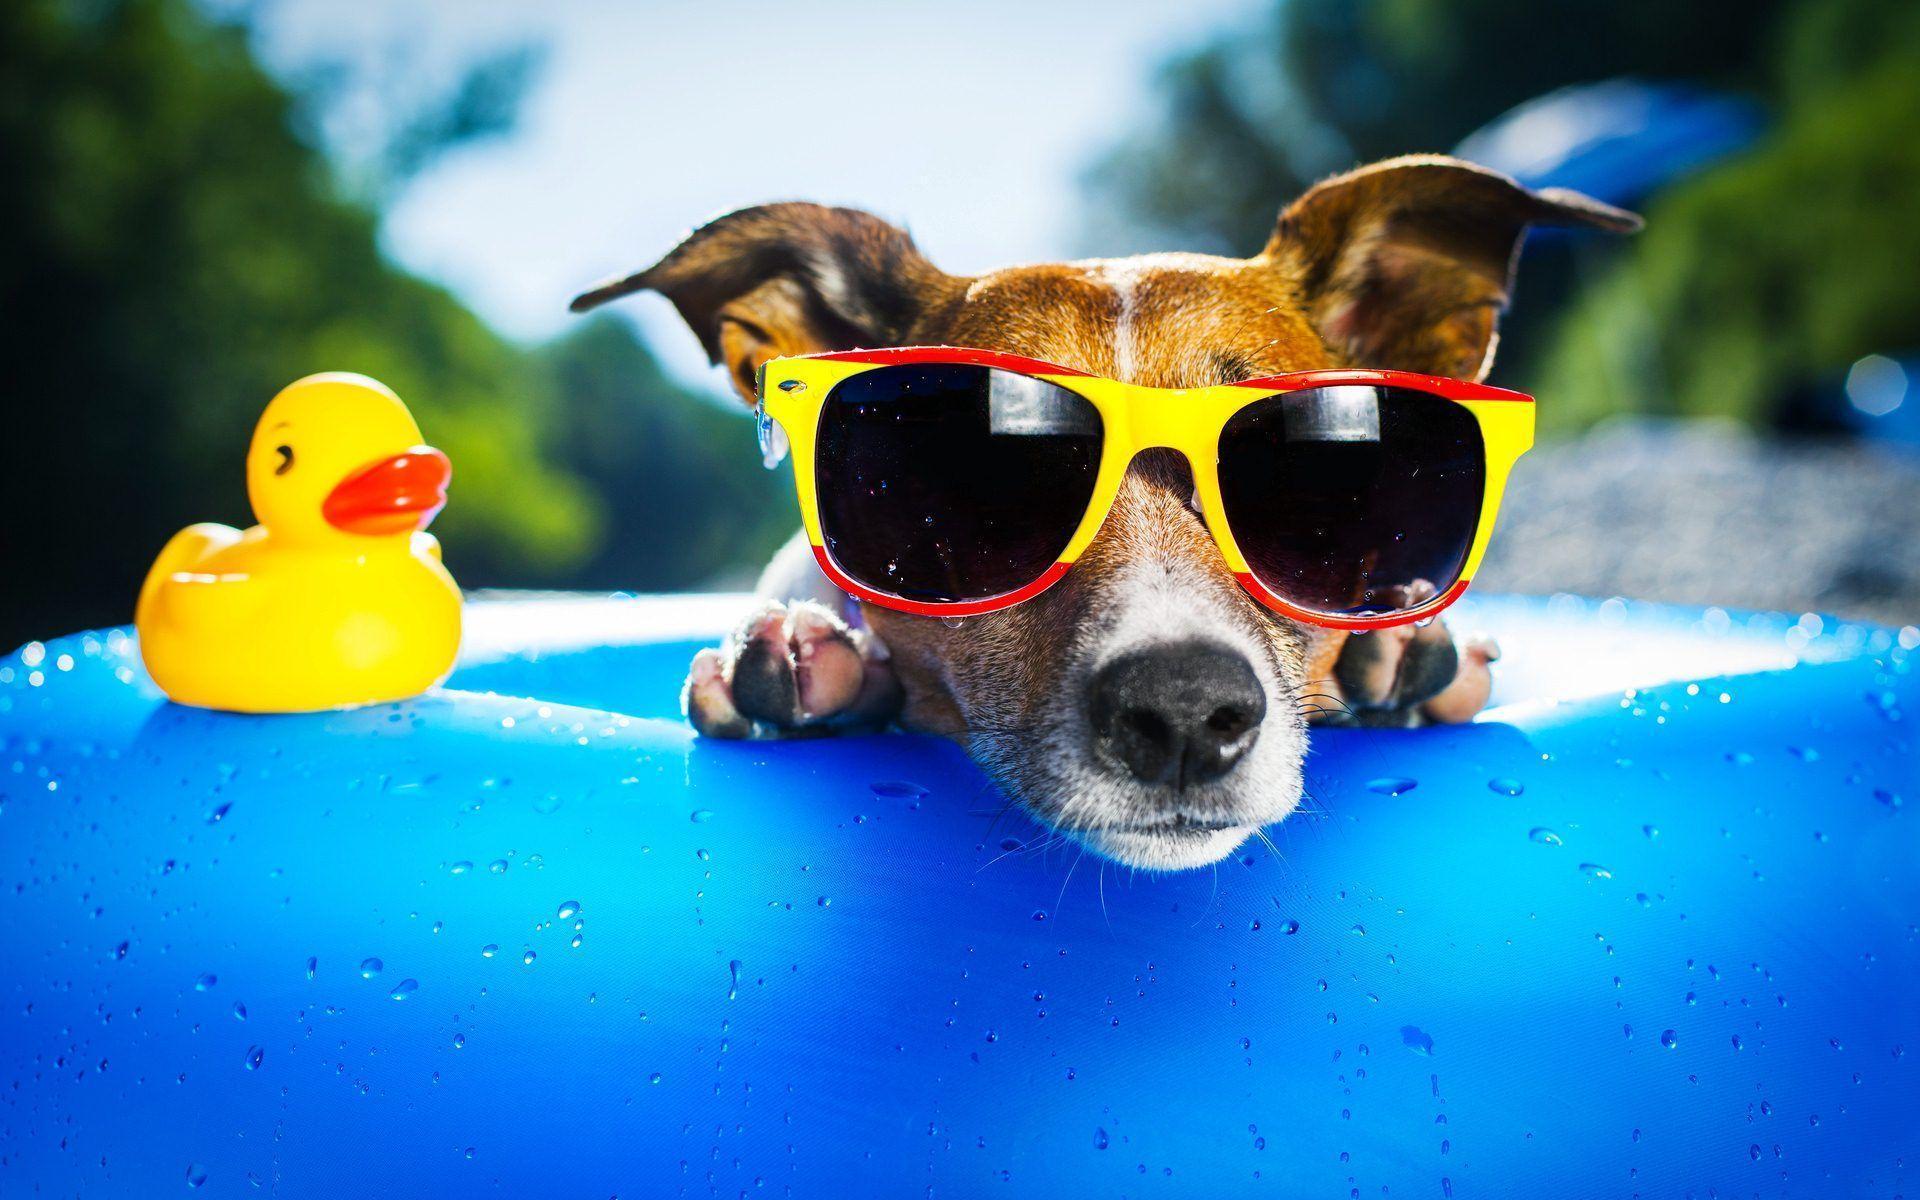 Cool Dog With Sunglasses. Dogs, cats and other critters